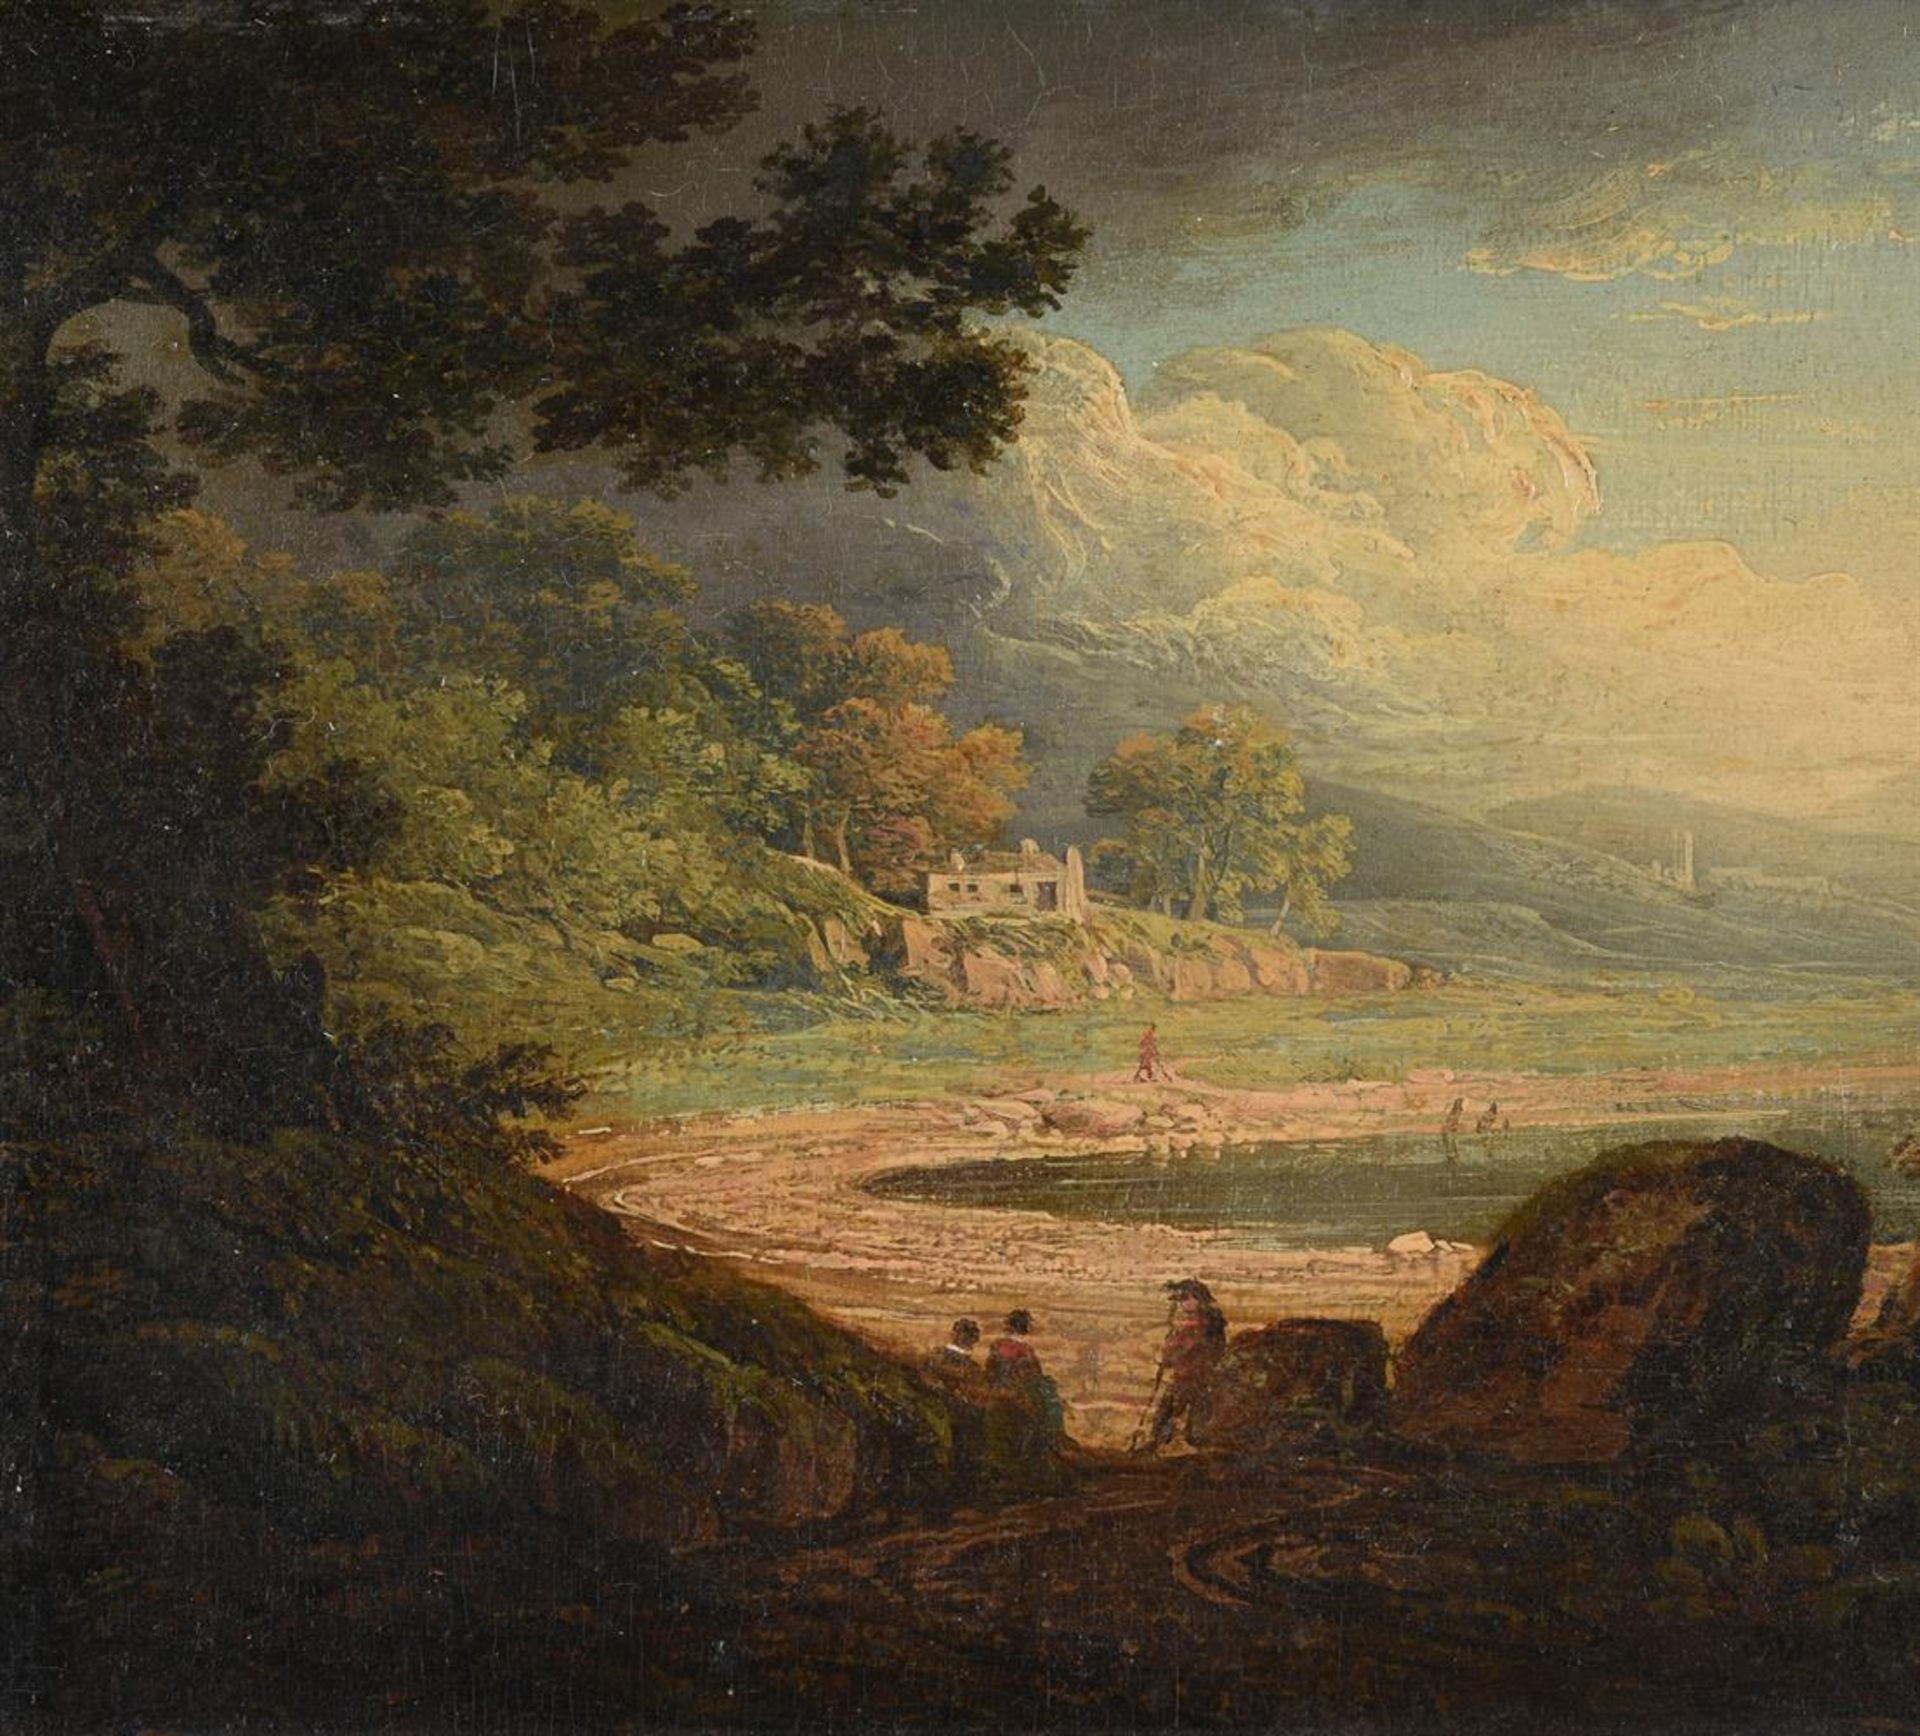 ENGLISH SCHOOL (19TH CENTURY), A WOODED LANDSCAPE WITH FIGURES BY A LAKE - Image 2 of 2